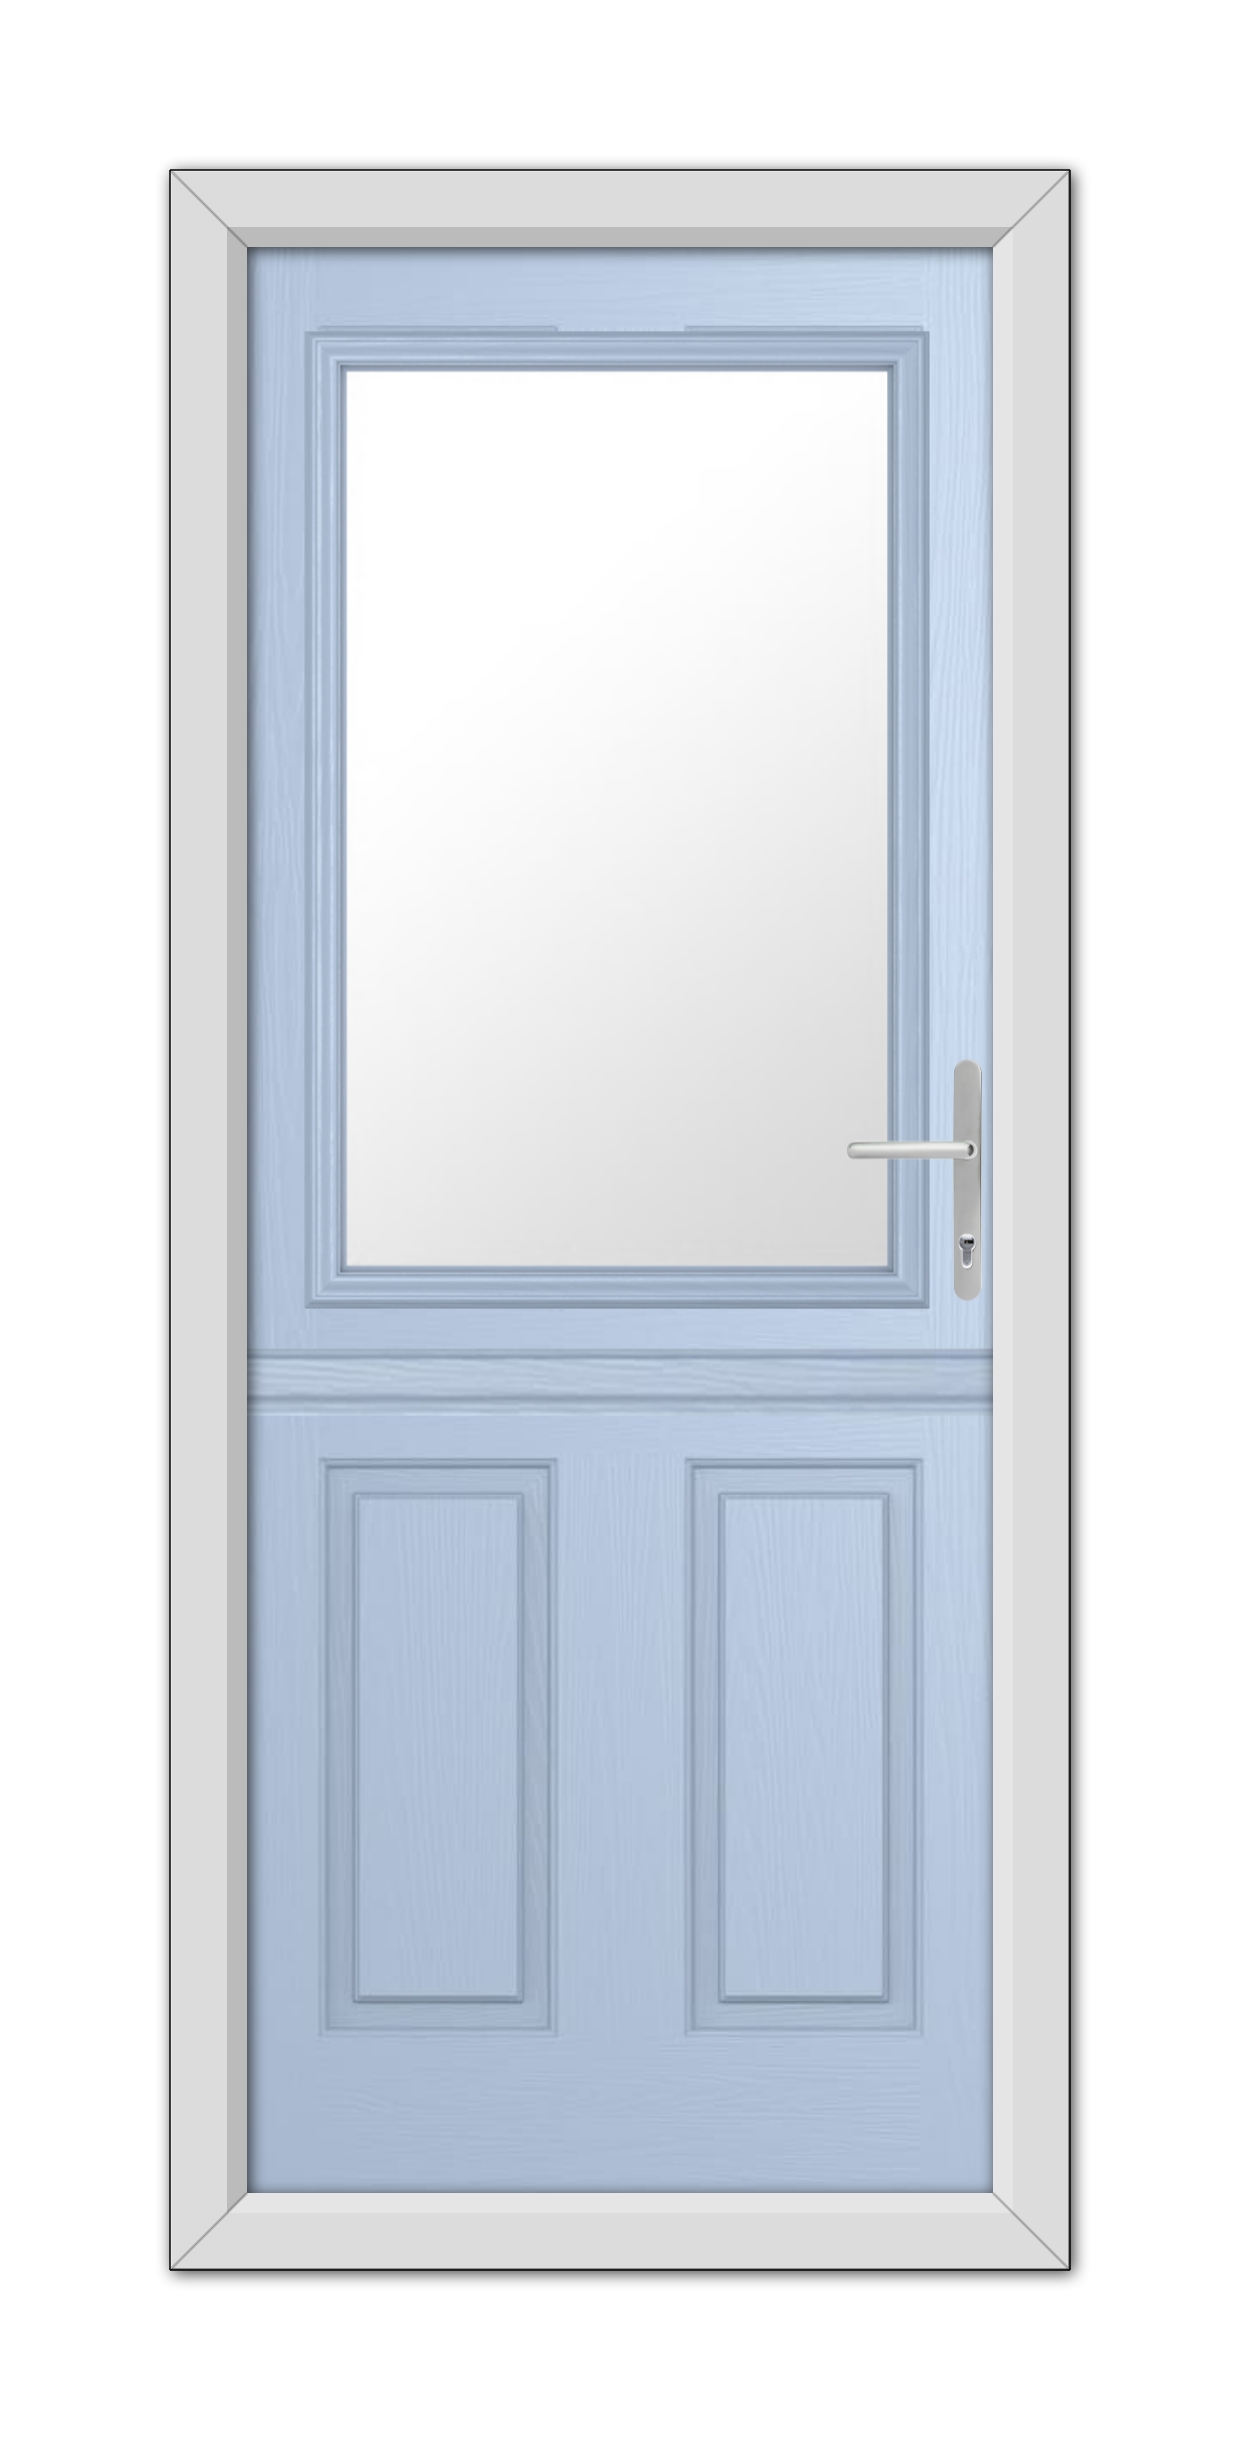 A Duck Egg Blue Buxton Stable Composite Door 48mm Timber Core with a rectangular window at the top, set in a white door frame, featuring a silver handle on the right side.